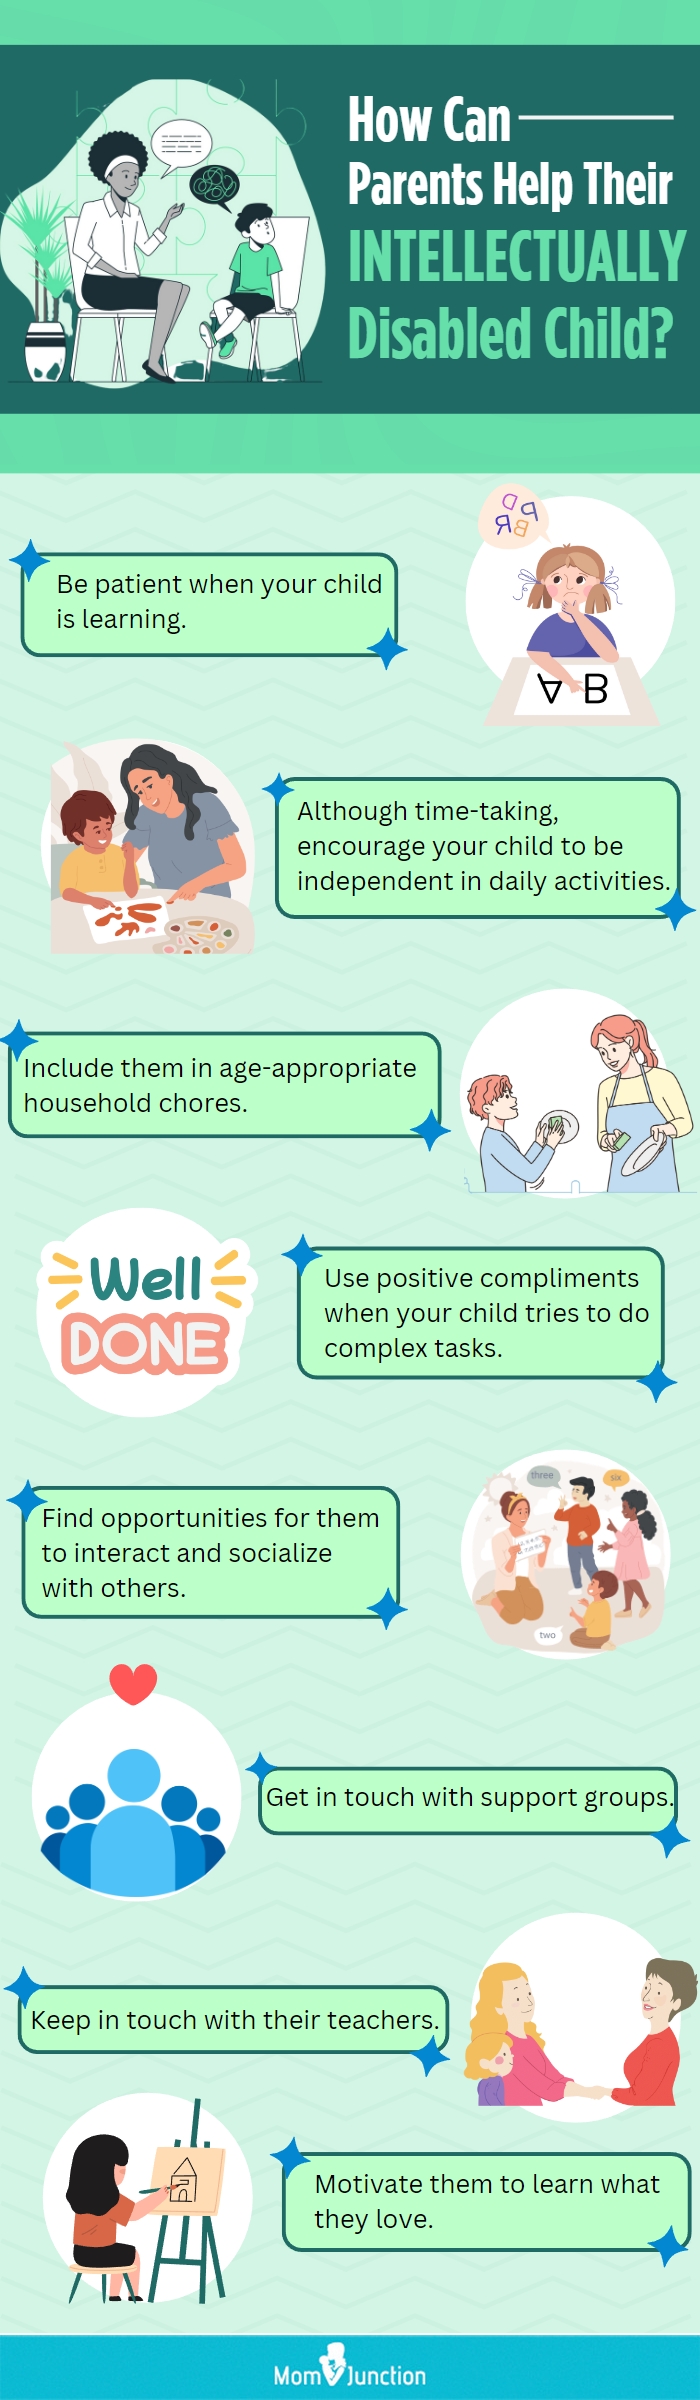 how can parents help their intellectually disabled child (infographic)